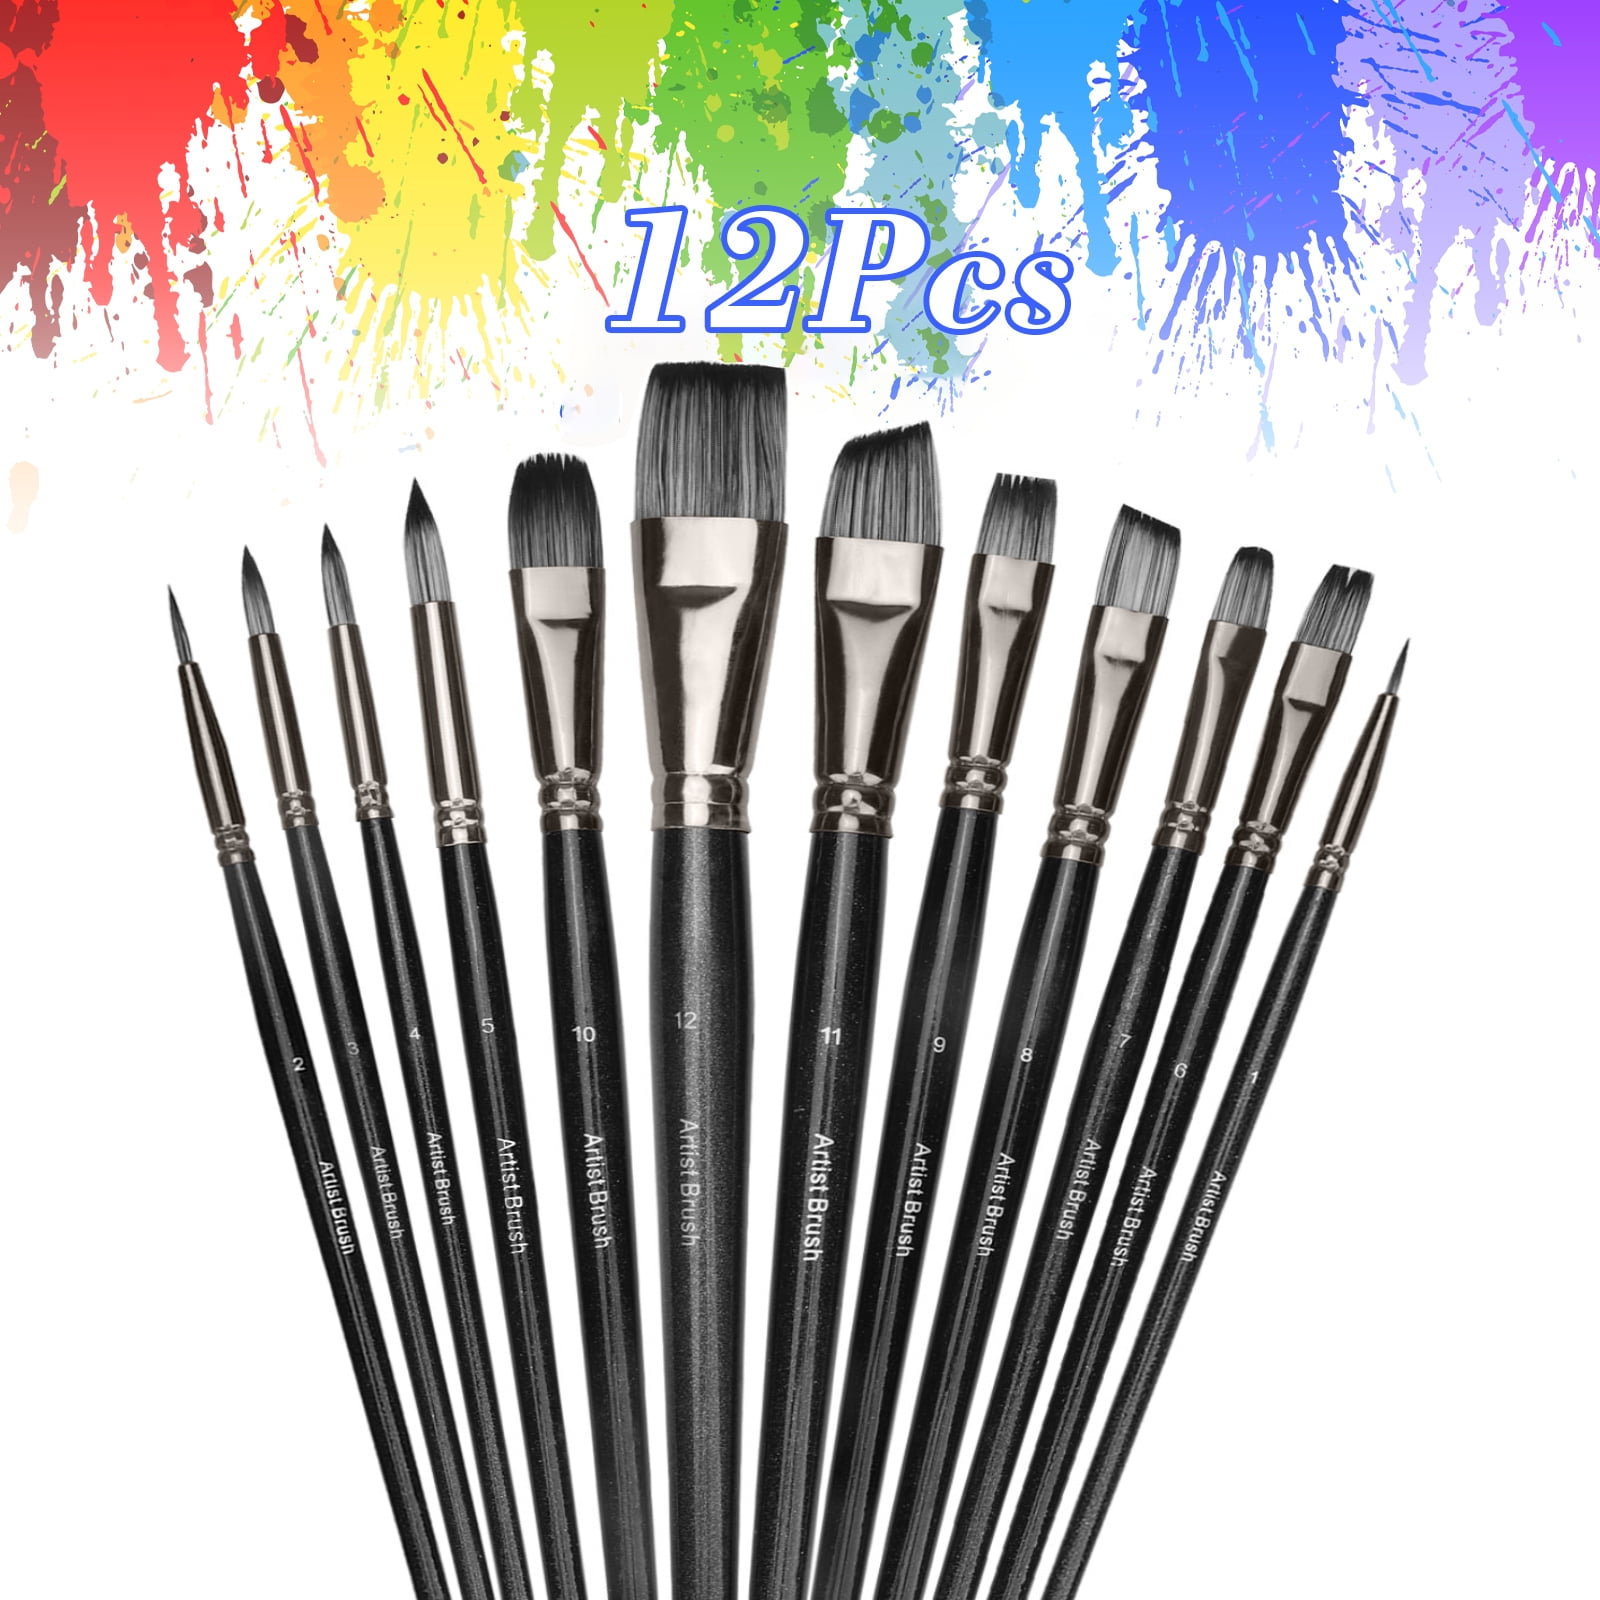 12pcs Paint Brush Set Flat Paint Brushes Multifunctional Paint Brushes Suitable for Watercolor and Face Painting DIY Art Crafts-Blue Art Brushes